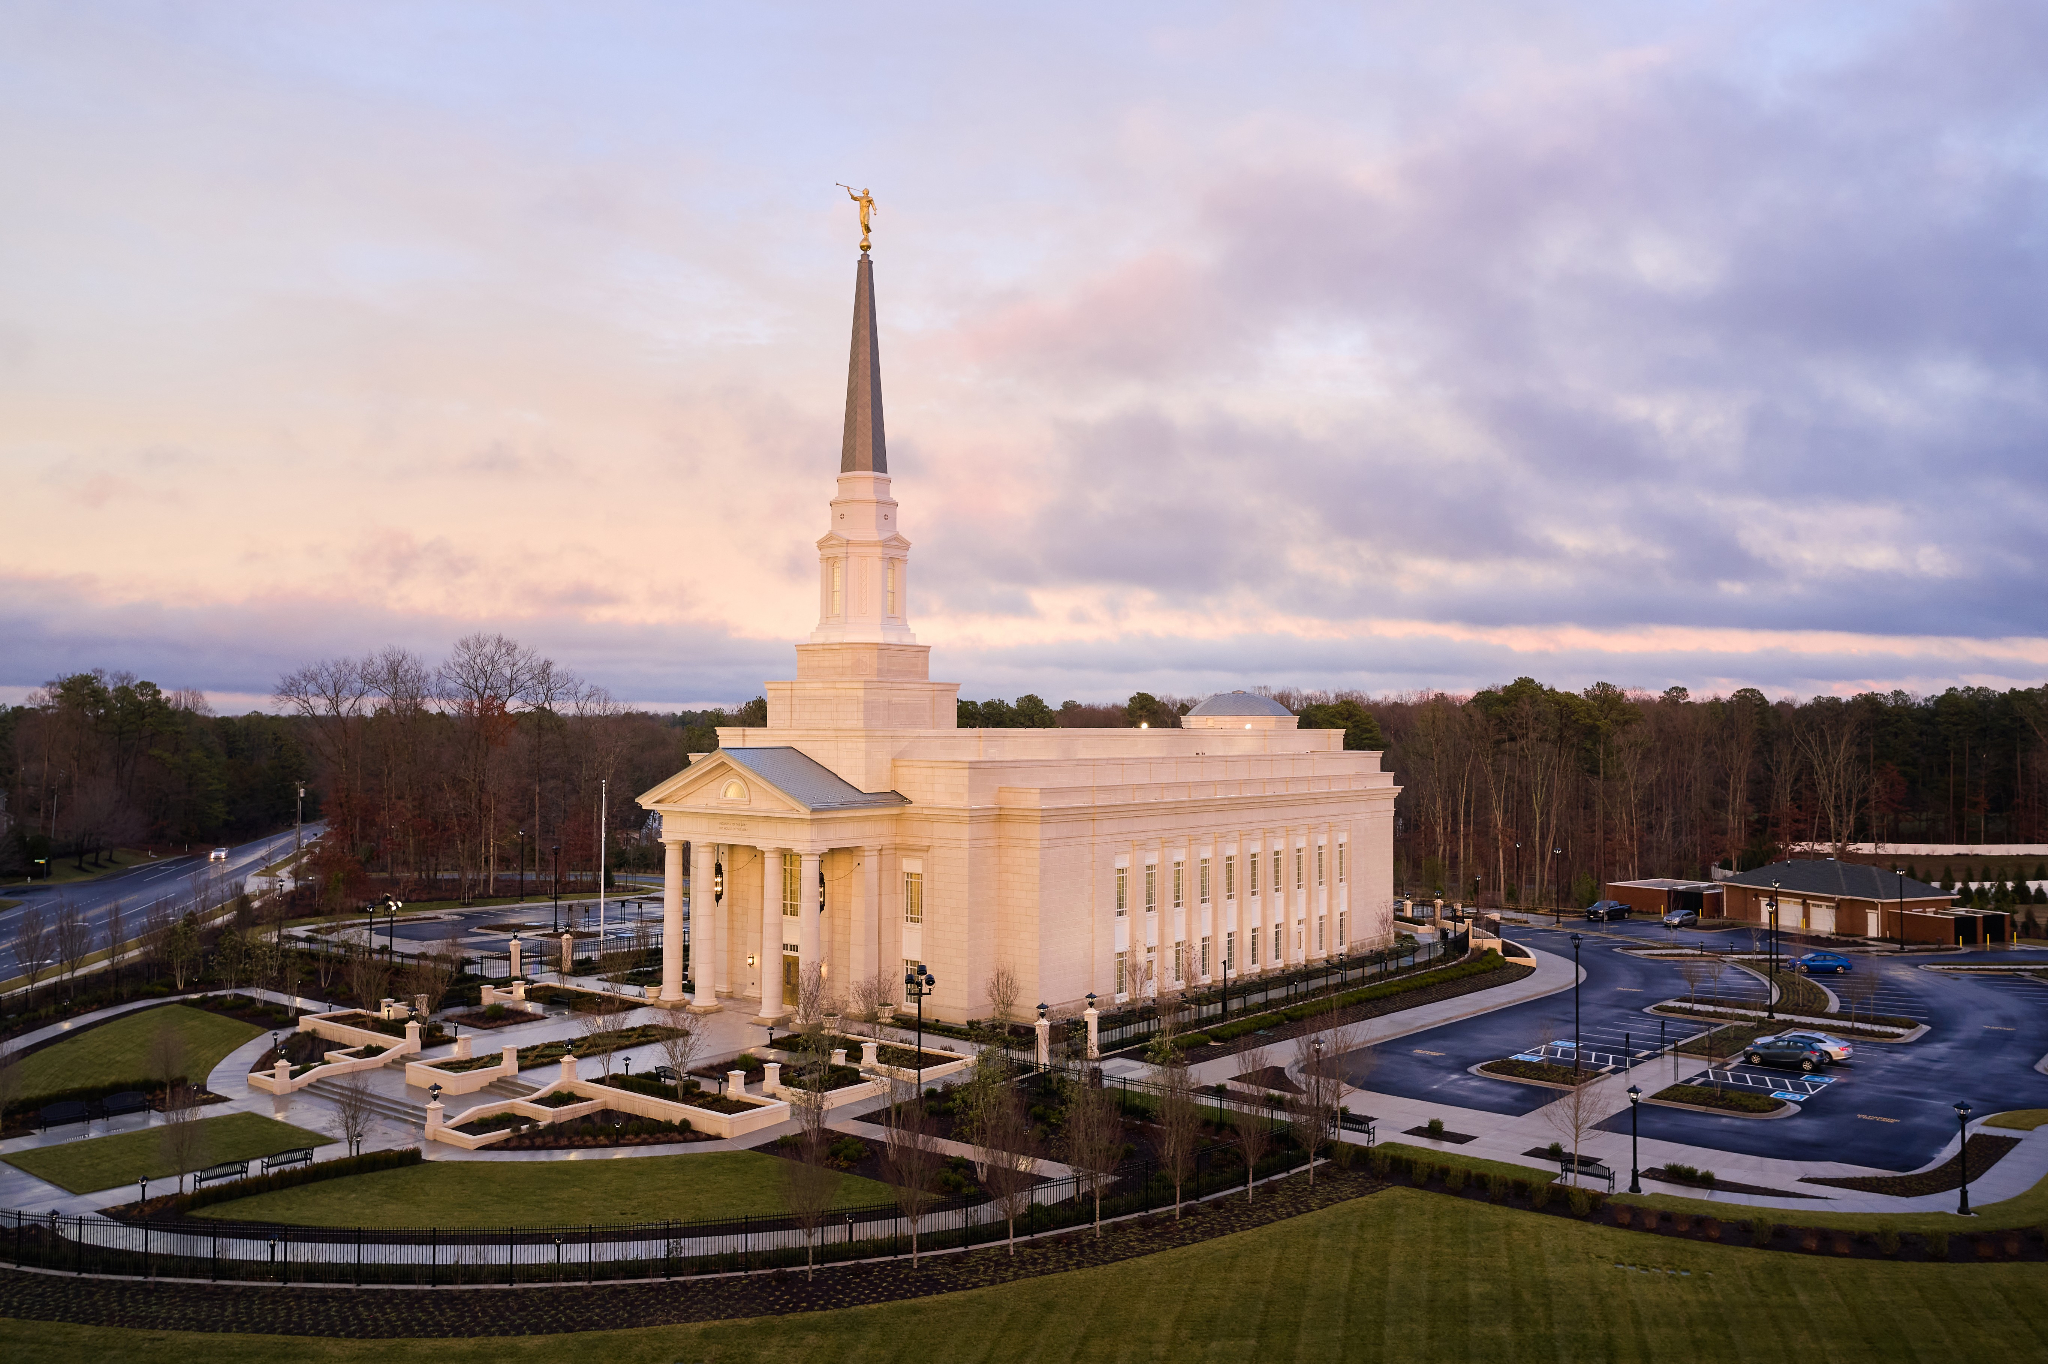 The Richmond Virginia Temple, a two-story rectangular building with a tall spire in the front center.